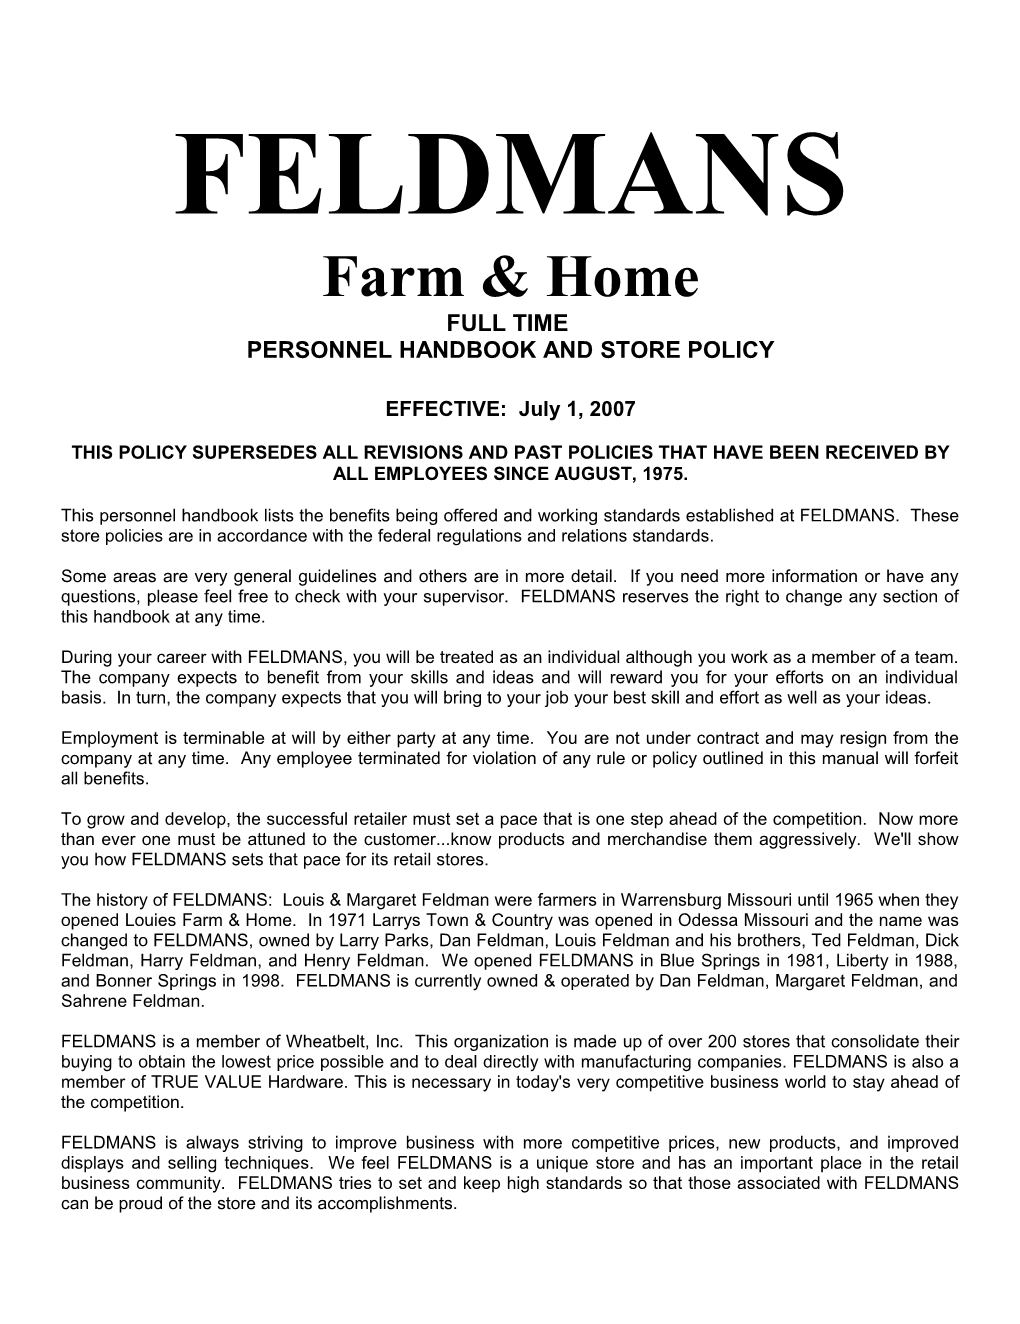 Personnel Handbook and Store Policy